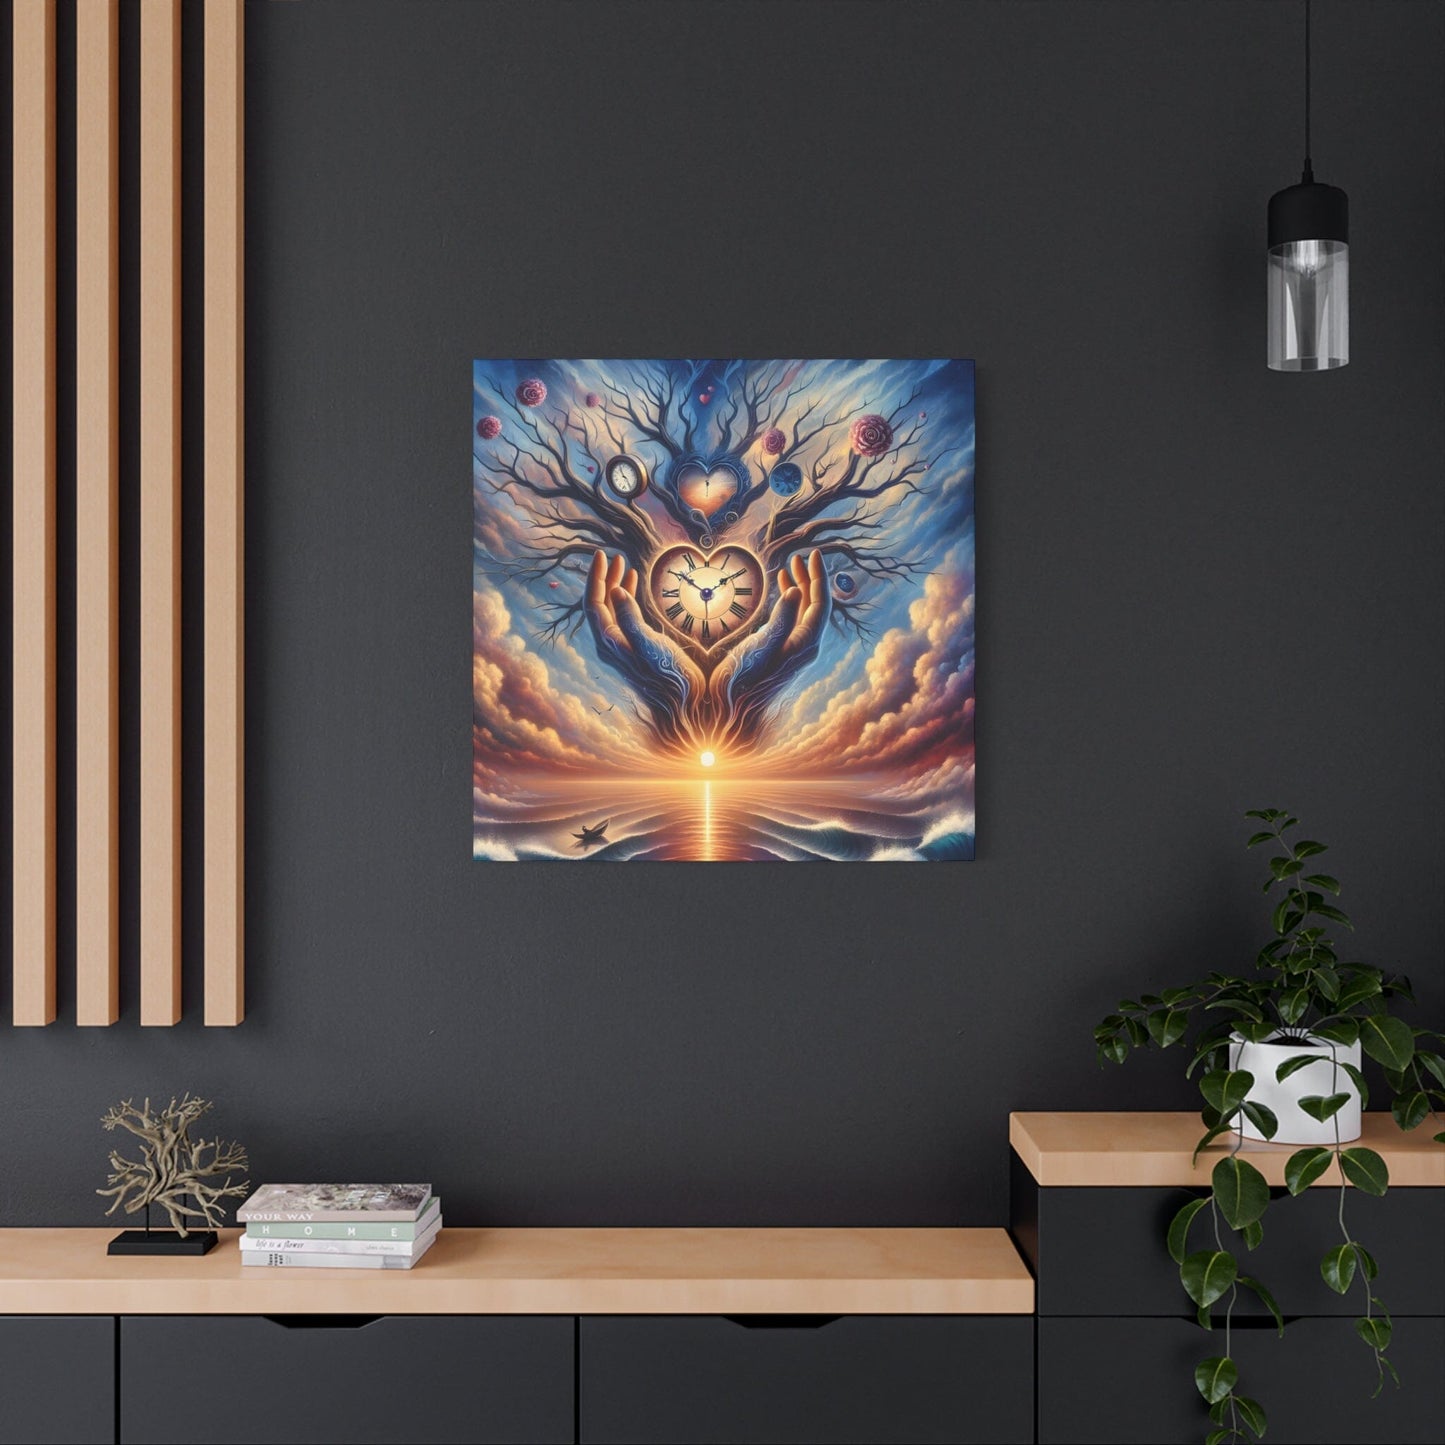 Maya Summers. Eternal Connection. Exclusive Graphic Art Canvas.